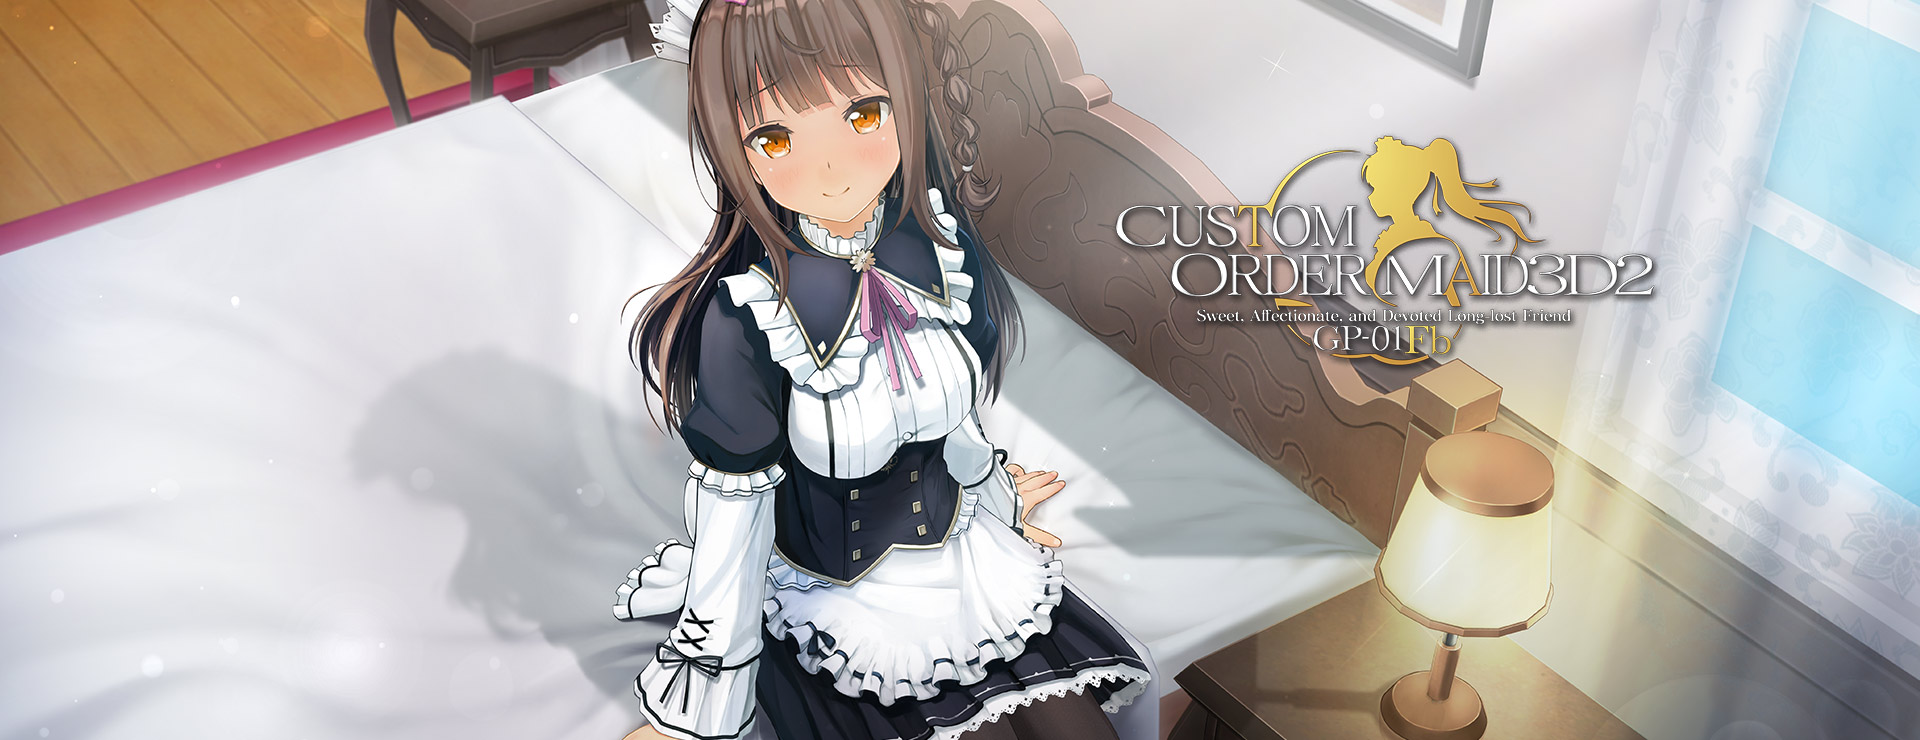 Custom Order Maid 3D 2: Sweet, Affectionate, and Devoted Long-lost Friend GP-01Fb - Simulation Spiel